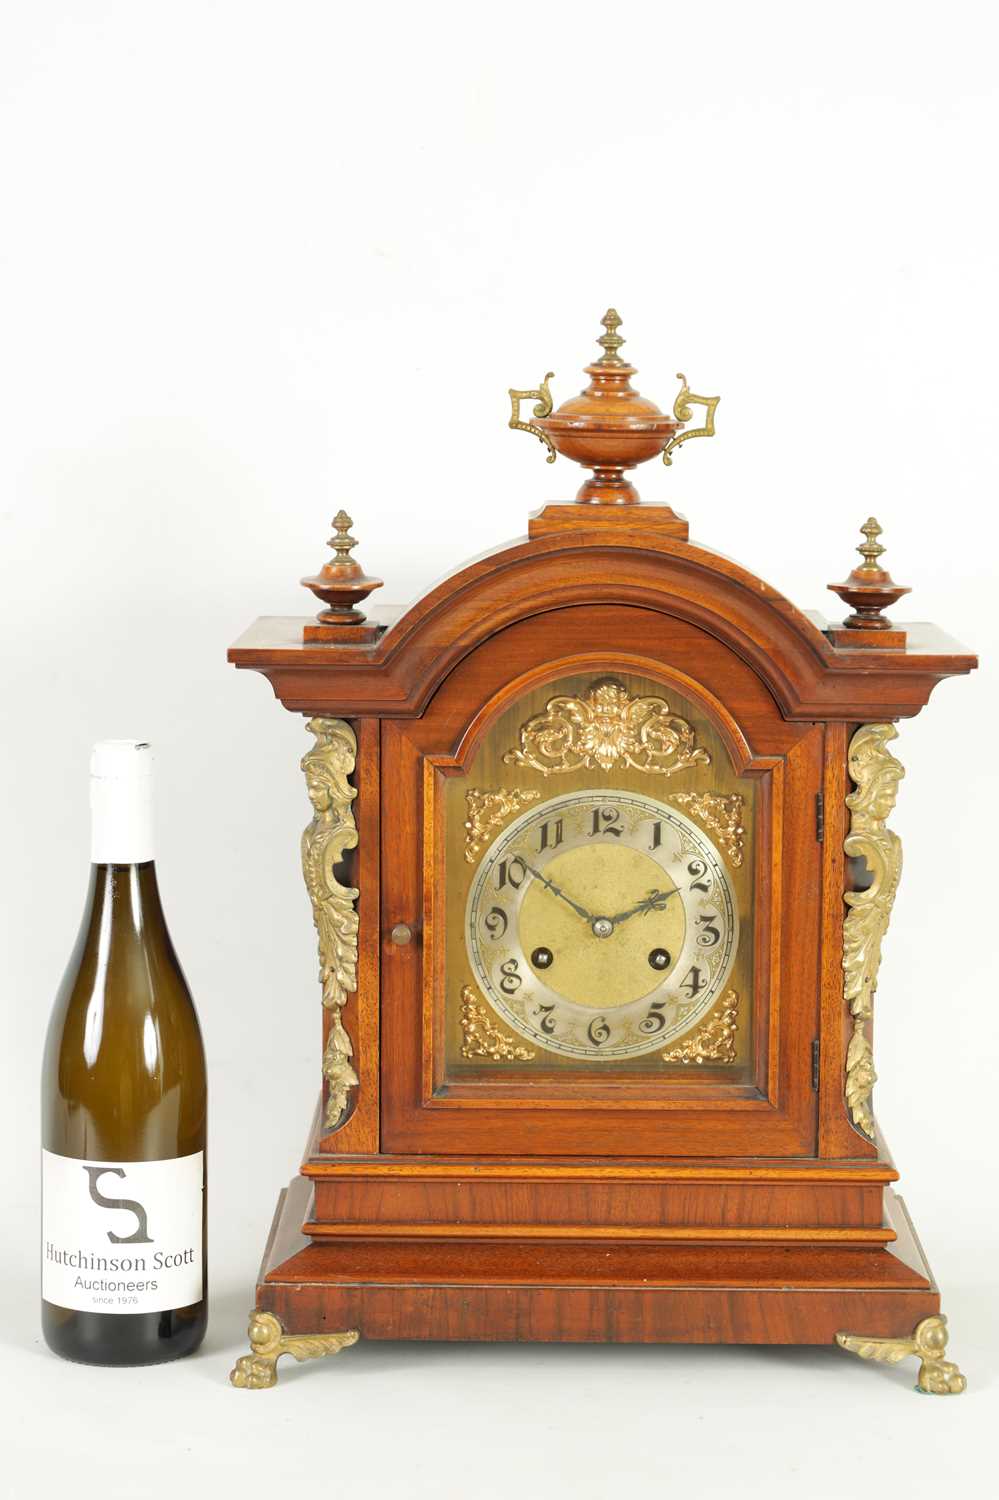 A LATE 19TH CENTURY GERMAN JUNGHANS WALNUT MANTEL CLOCK - Image 2 of 13